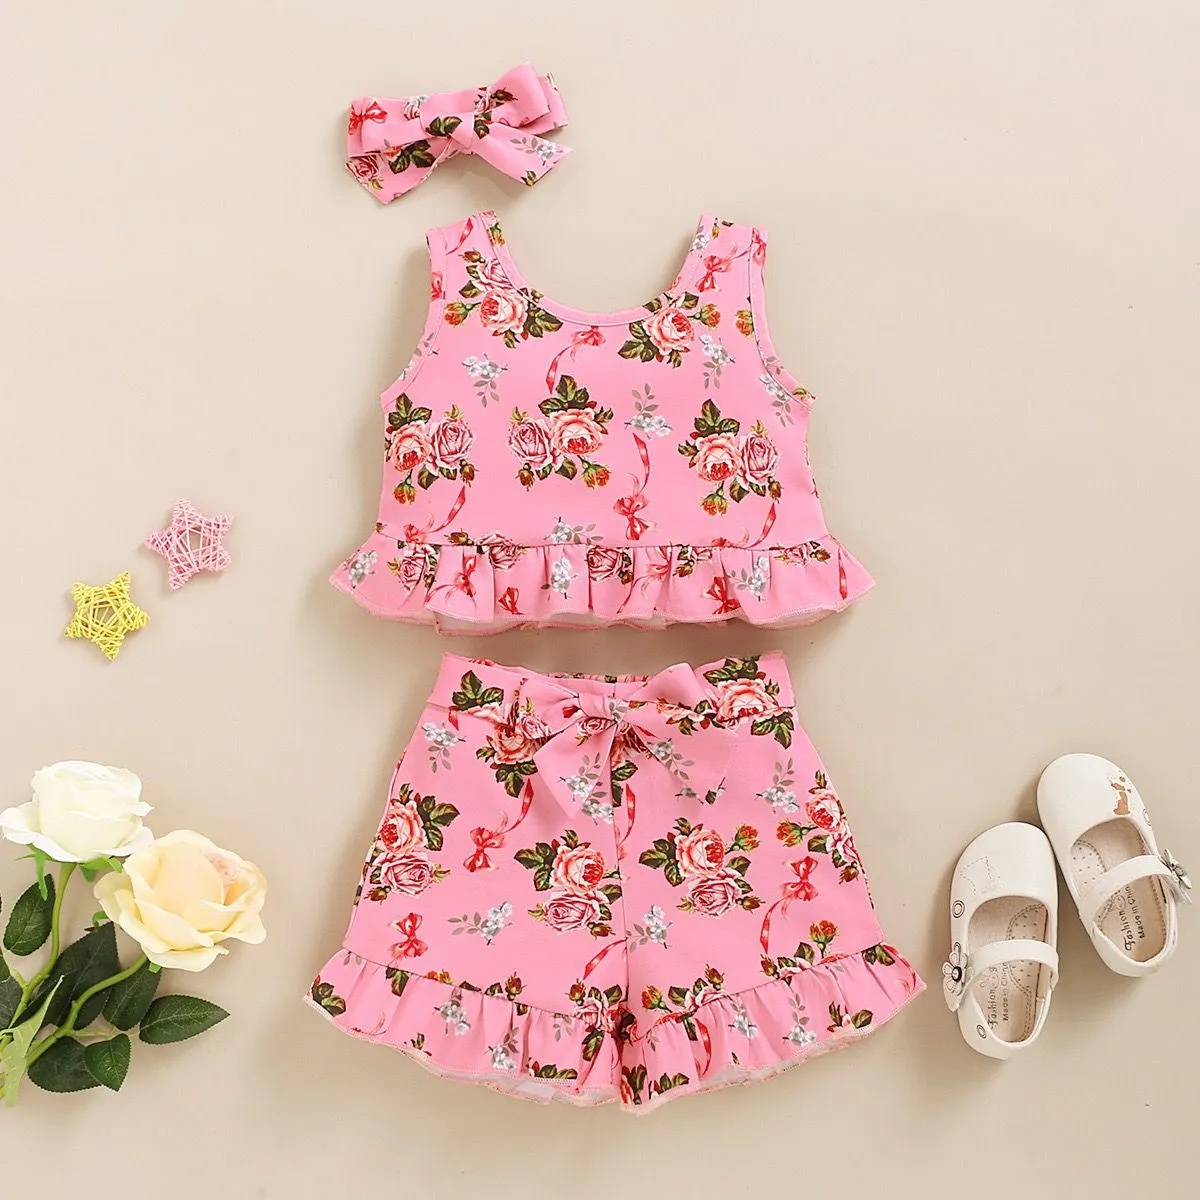 2021 Newborn Baby Girl Clothes Sets Summre Infant Toddler Kids Clothing Set Sleeveless Tops+Shorts+Headband 3PCS Floral Print Outfit 0-18M